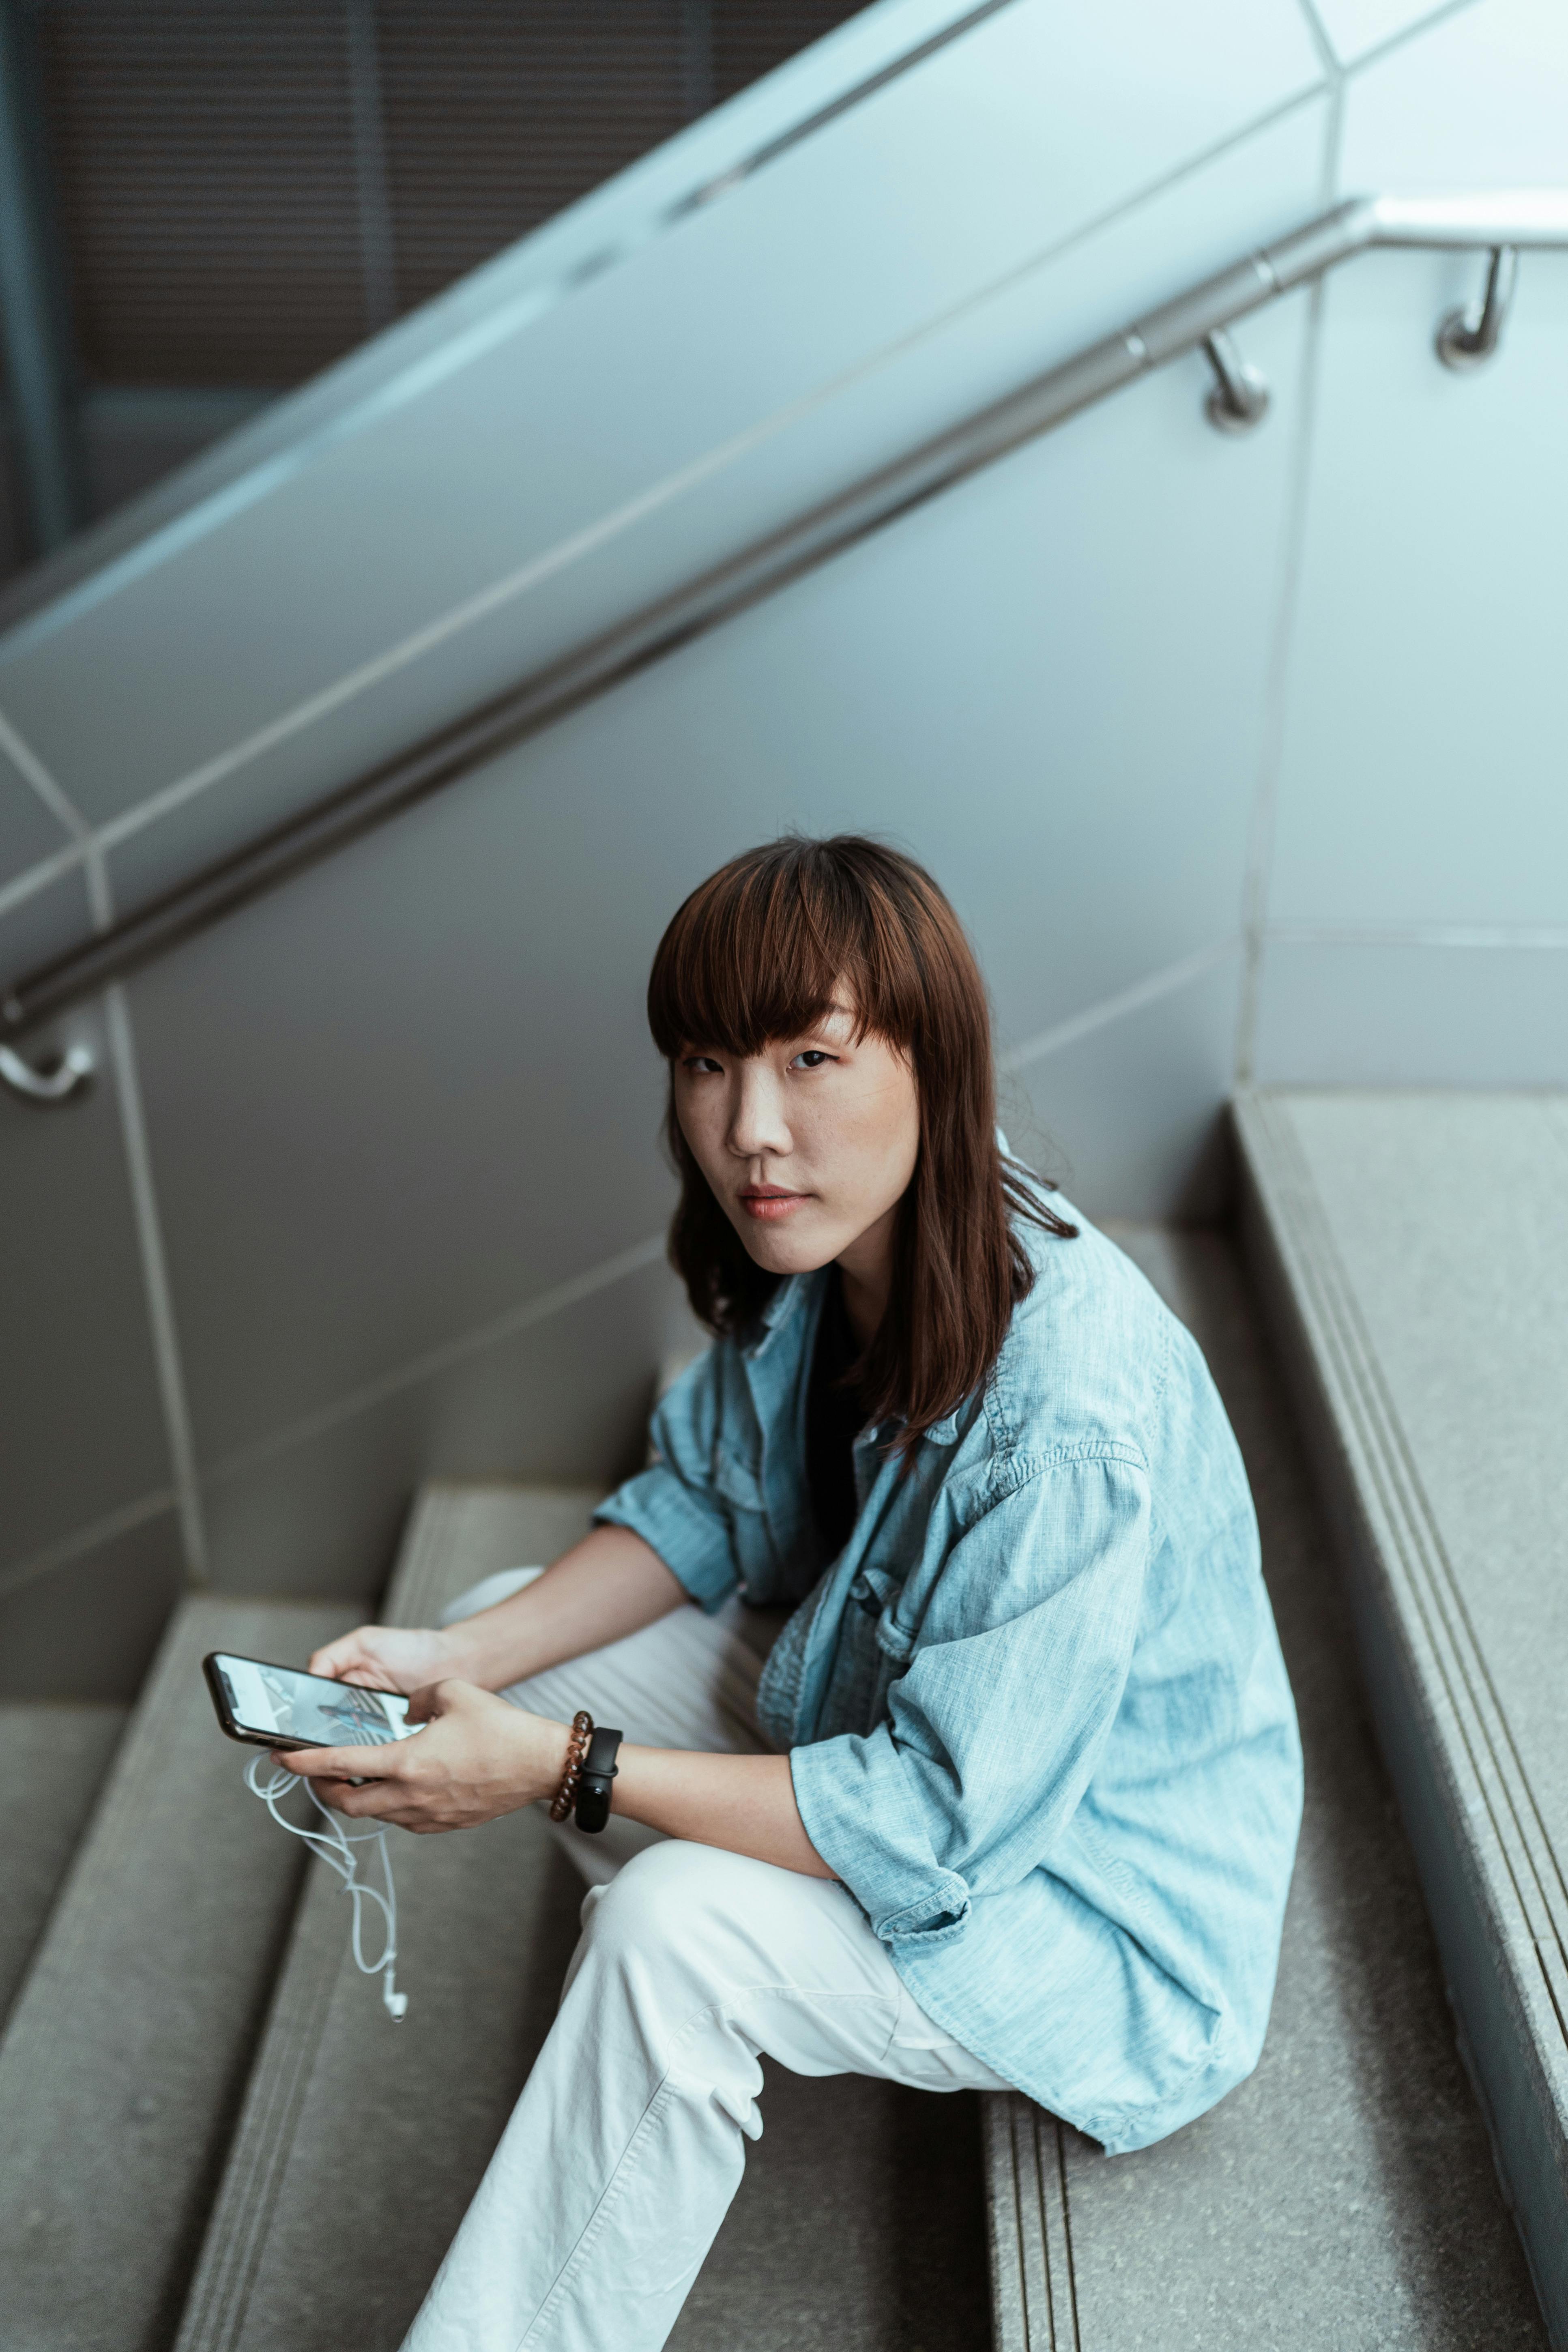 ponder asian woman surfing internet on smartphone sitting on stairs